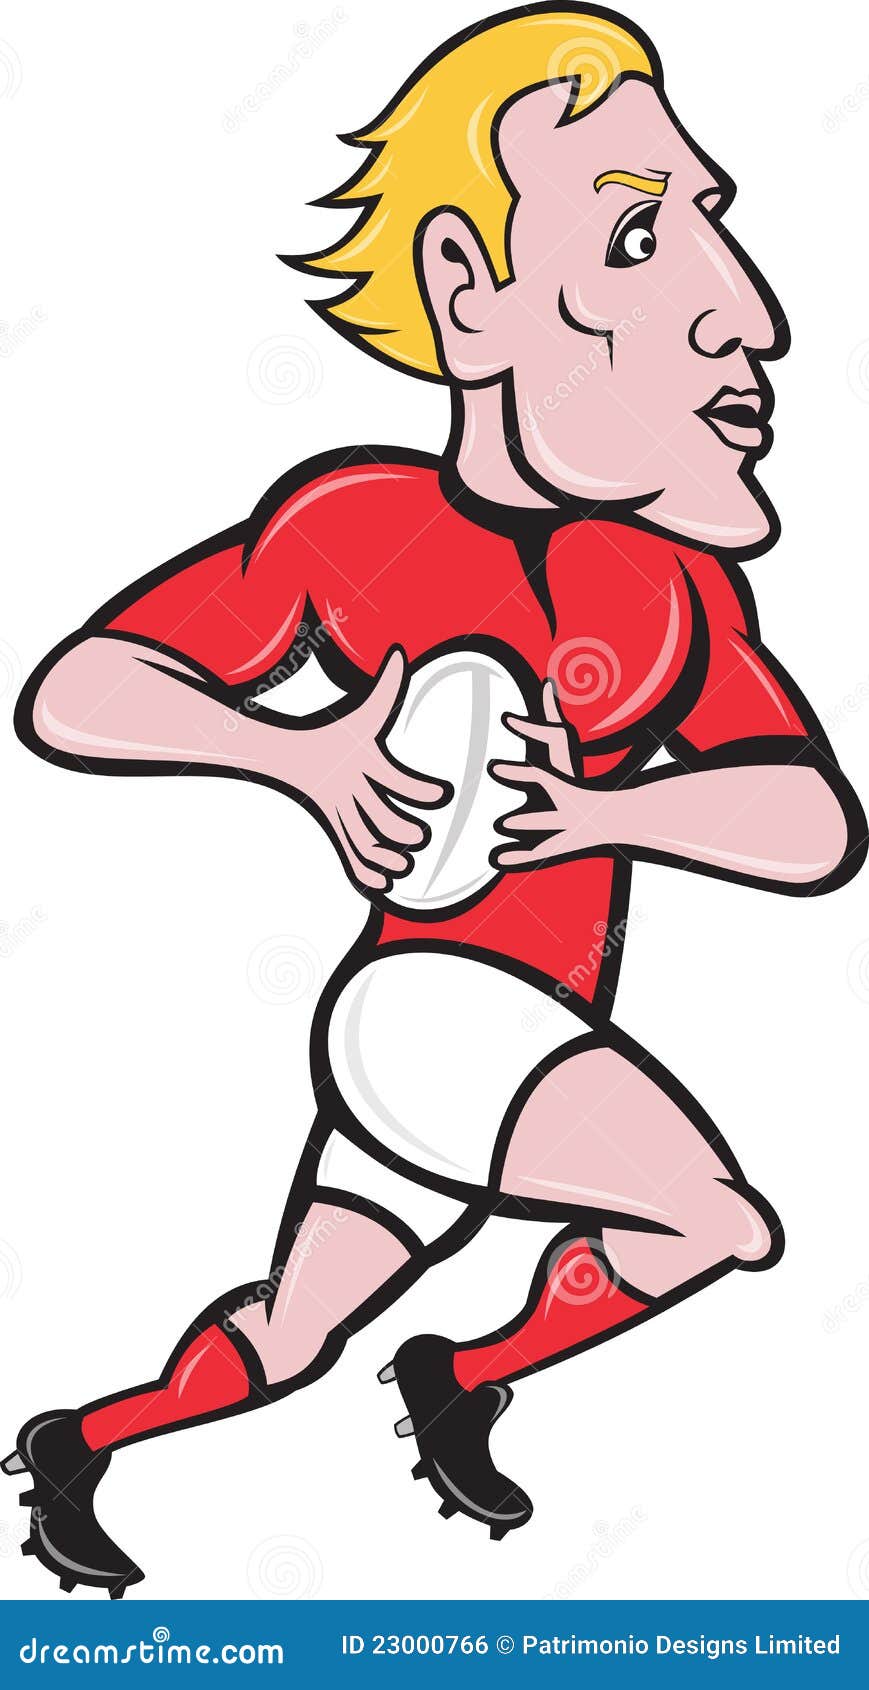 clipart rugby player - photo #40